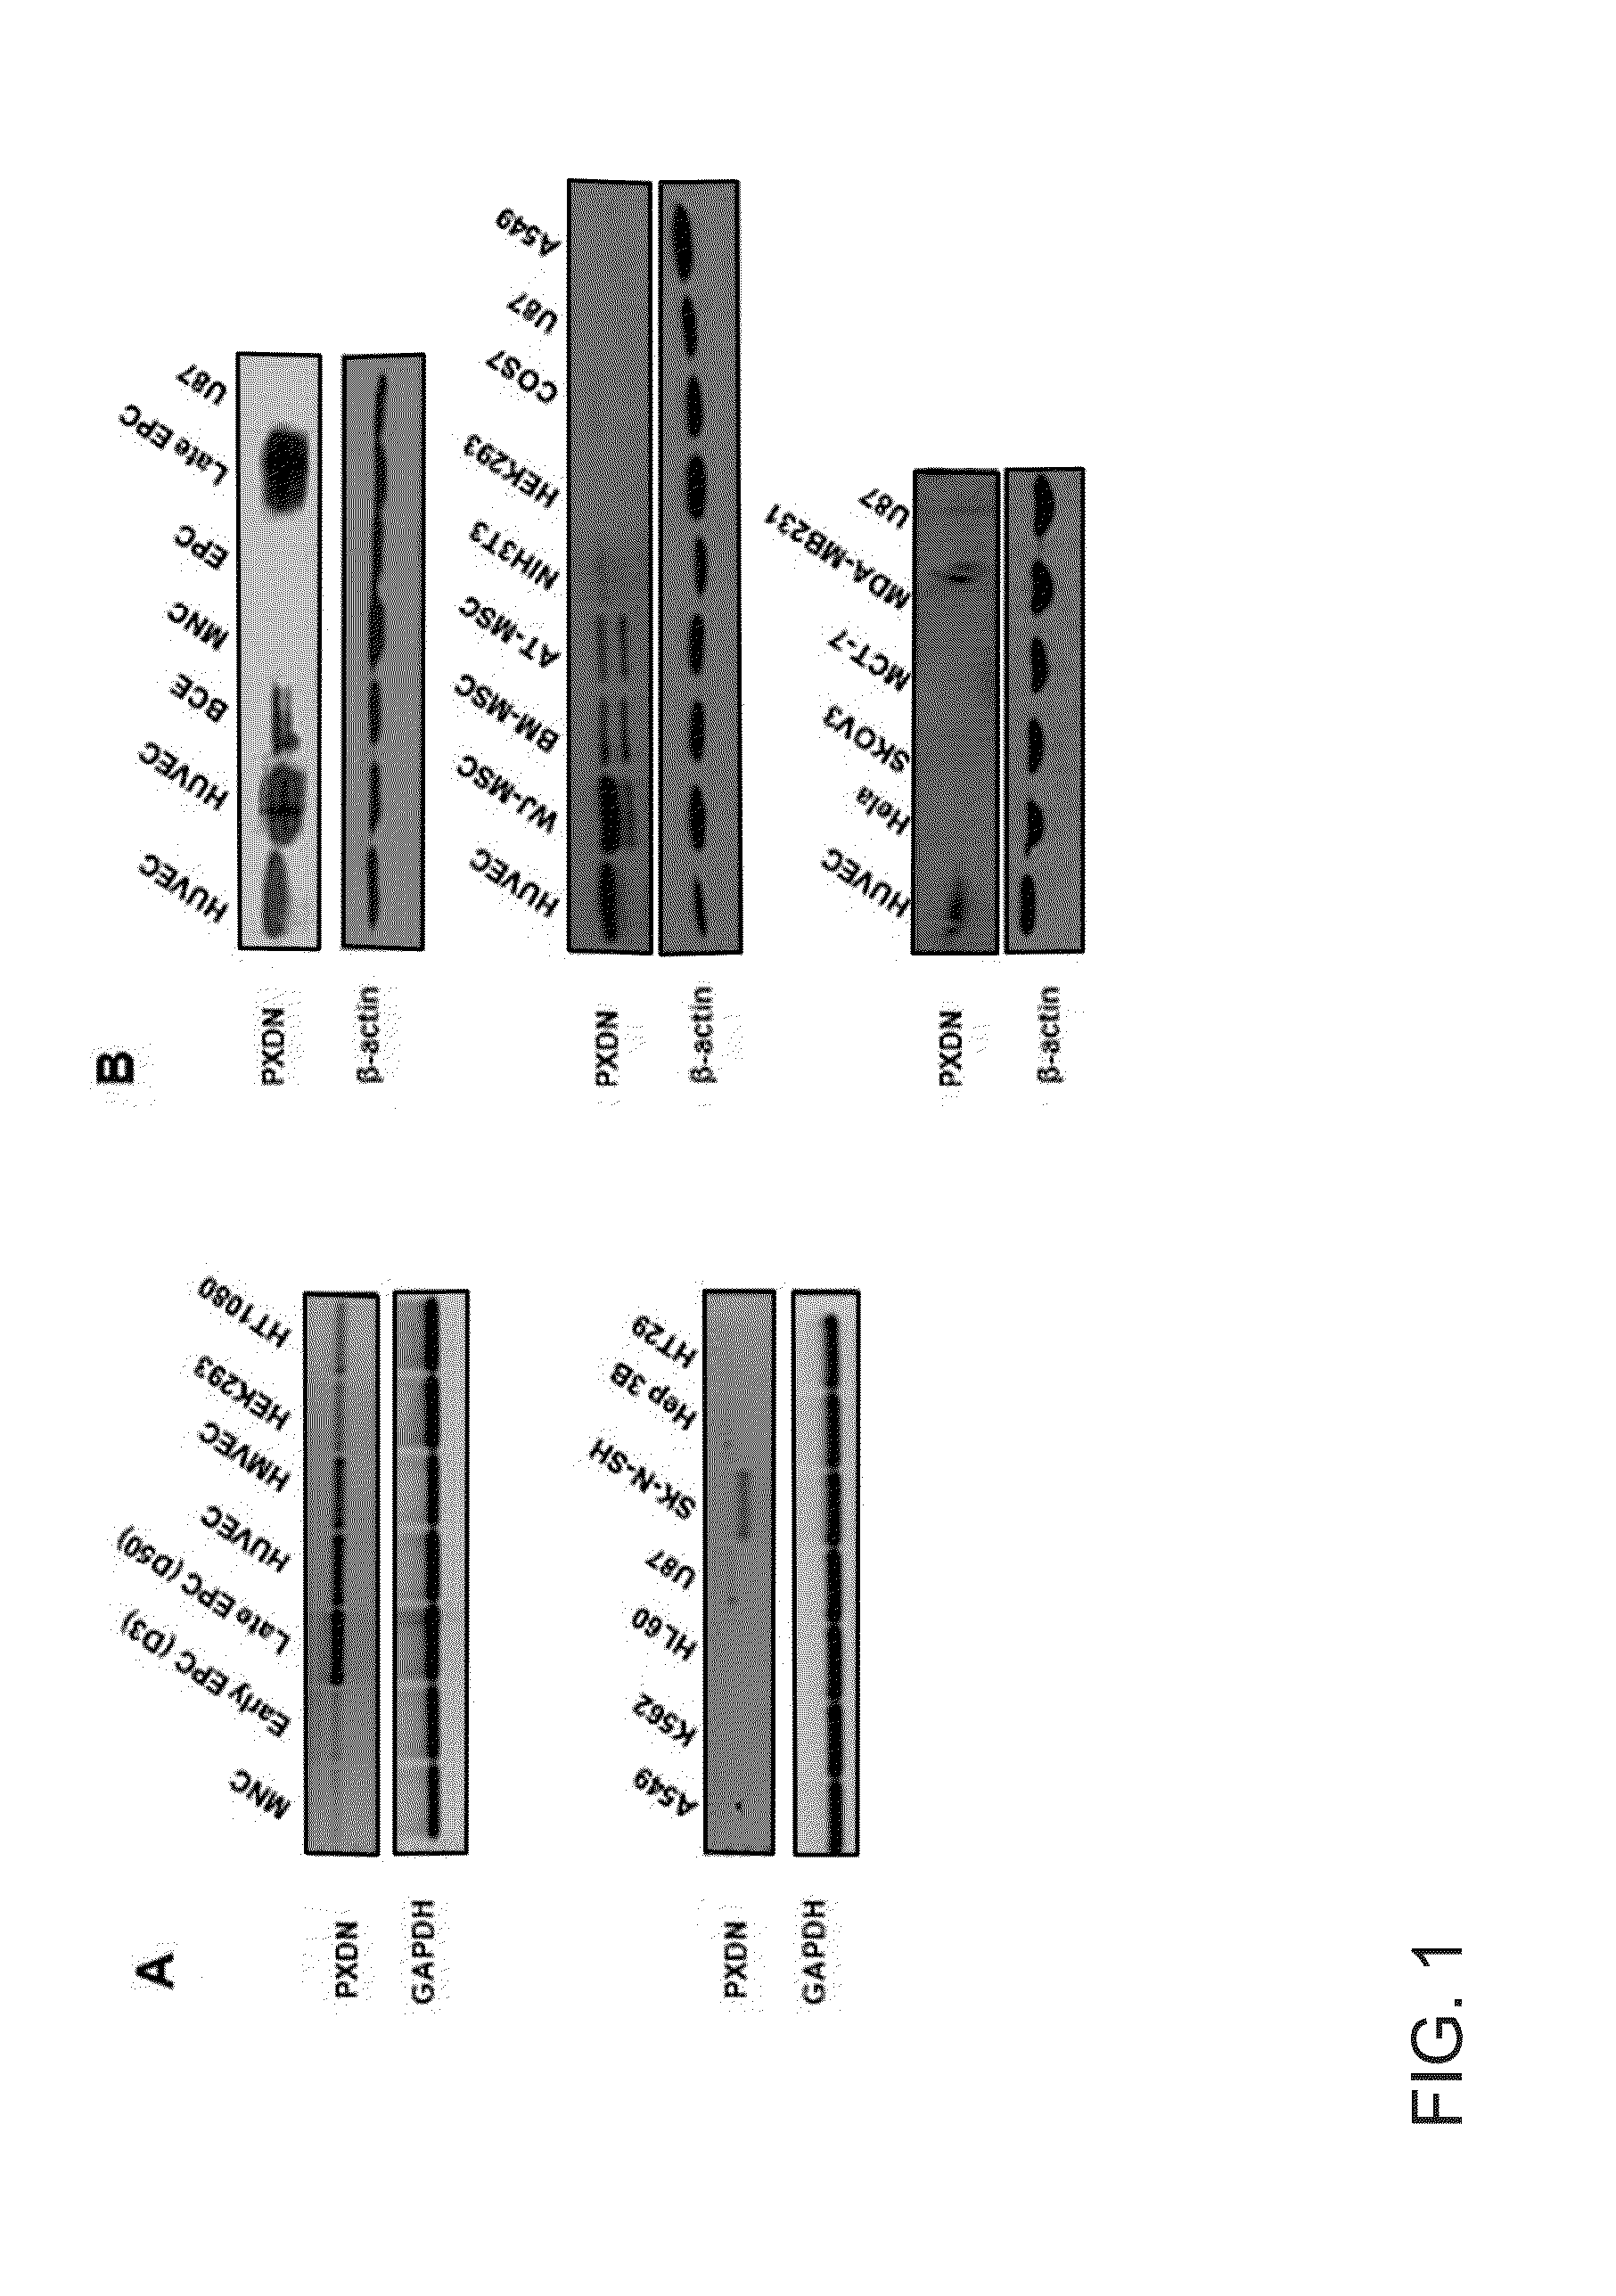 Composition for inhibiting angiogenesis containing a peroxidasin inhibitor as an active ingredient